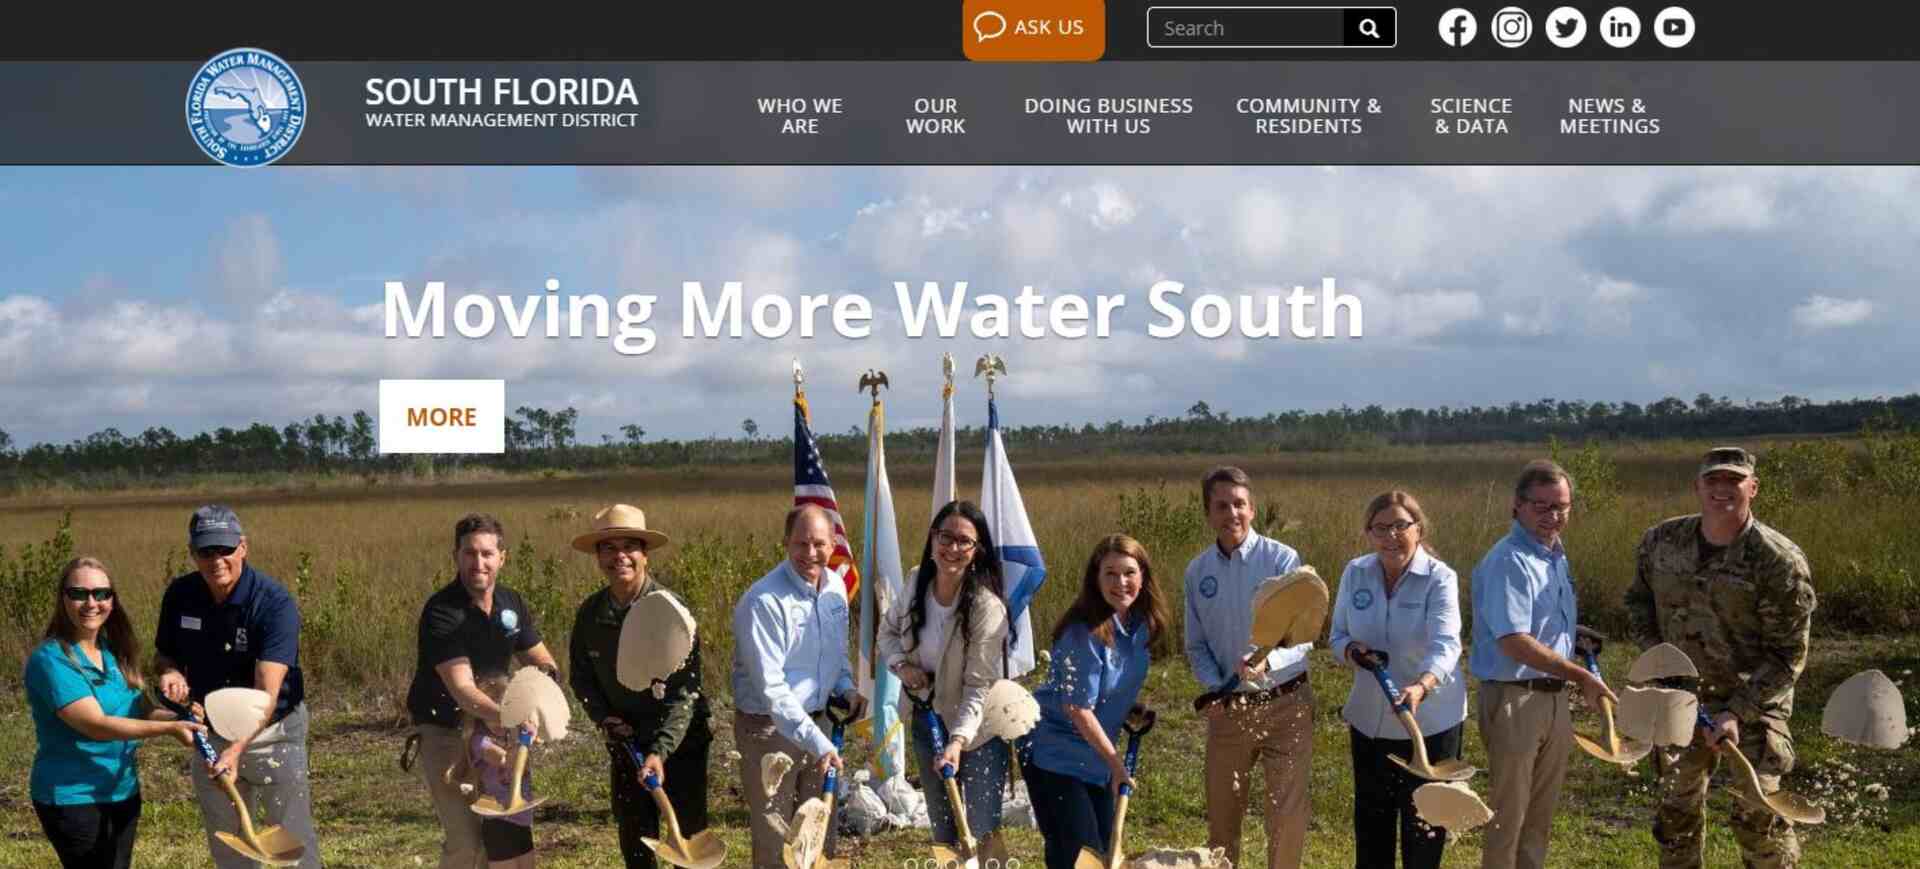 South Florida Water Management District homepage